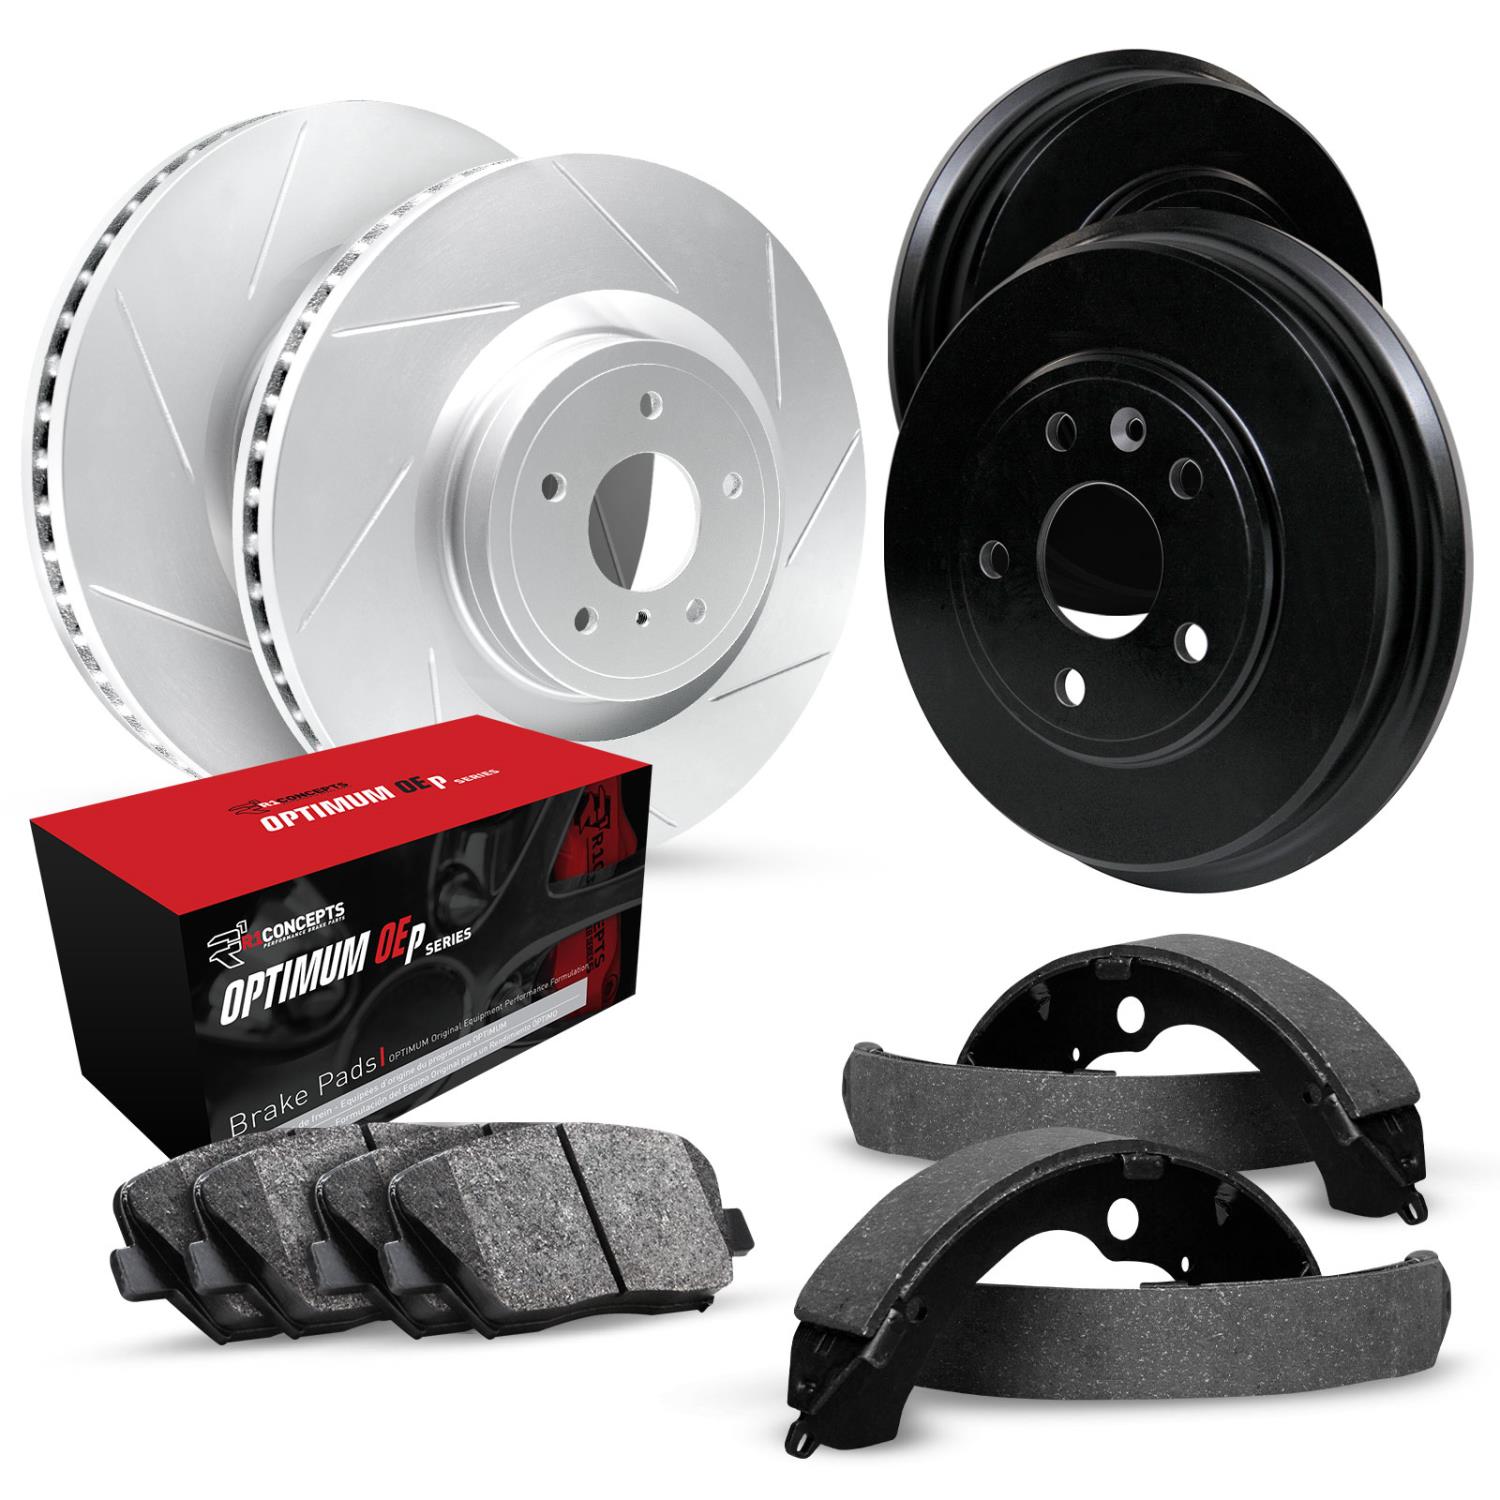 GEO-Carbon Slotted Brake Rotor & Drum Set w/Optimum OE Pads & Shoes, 1984-1994 Ford/Lincoln/Mercury/Mazda